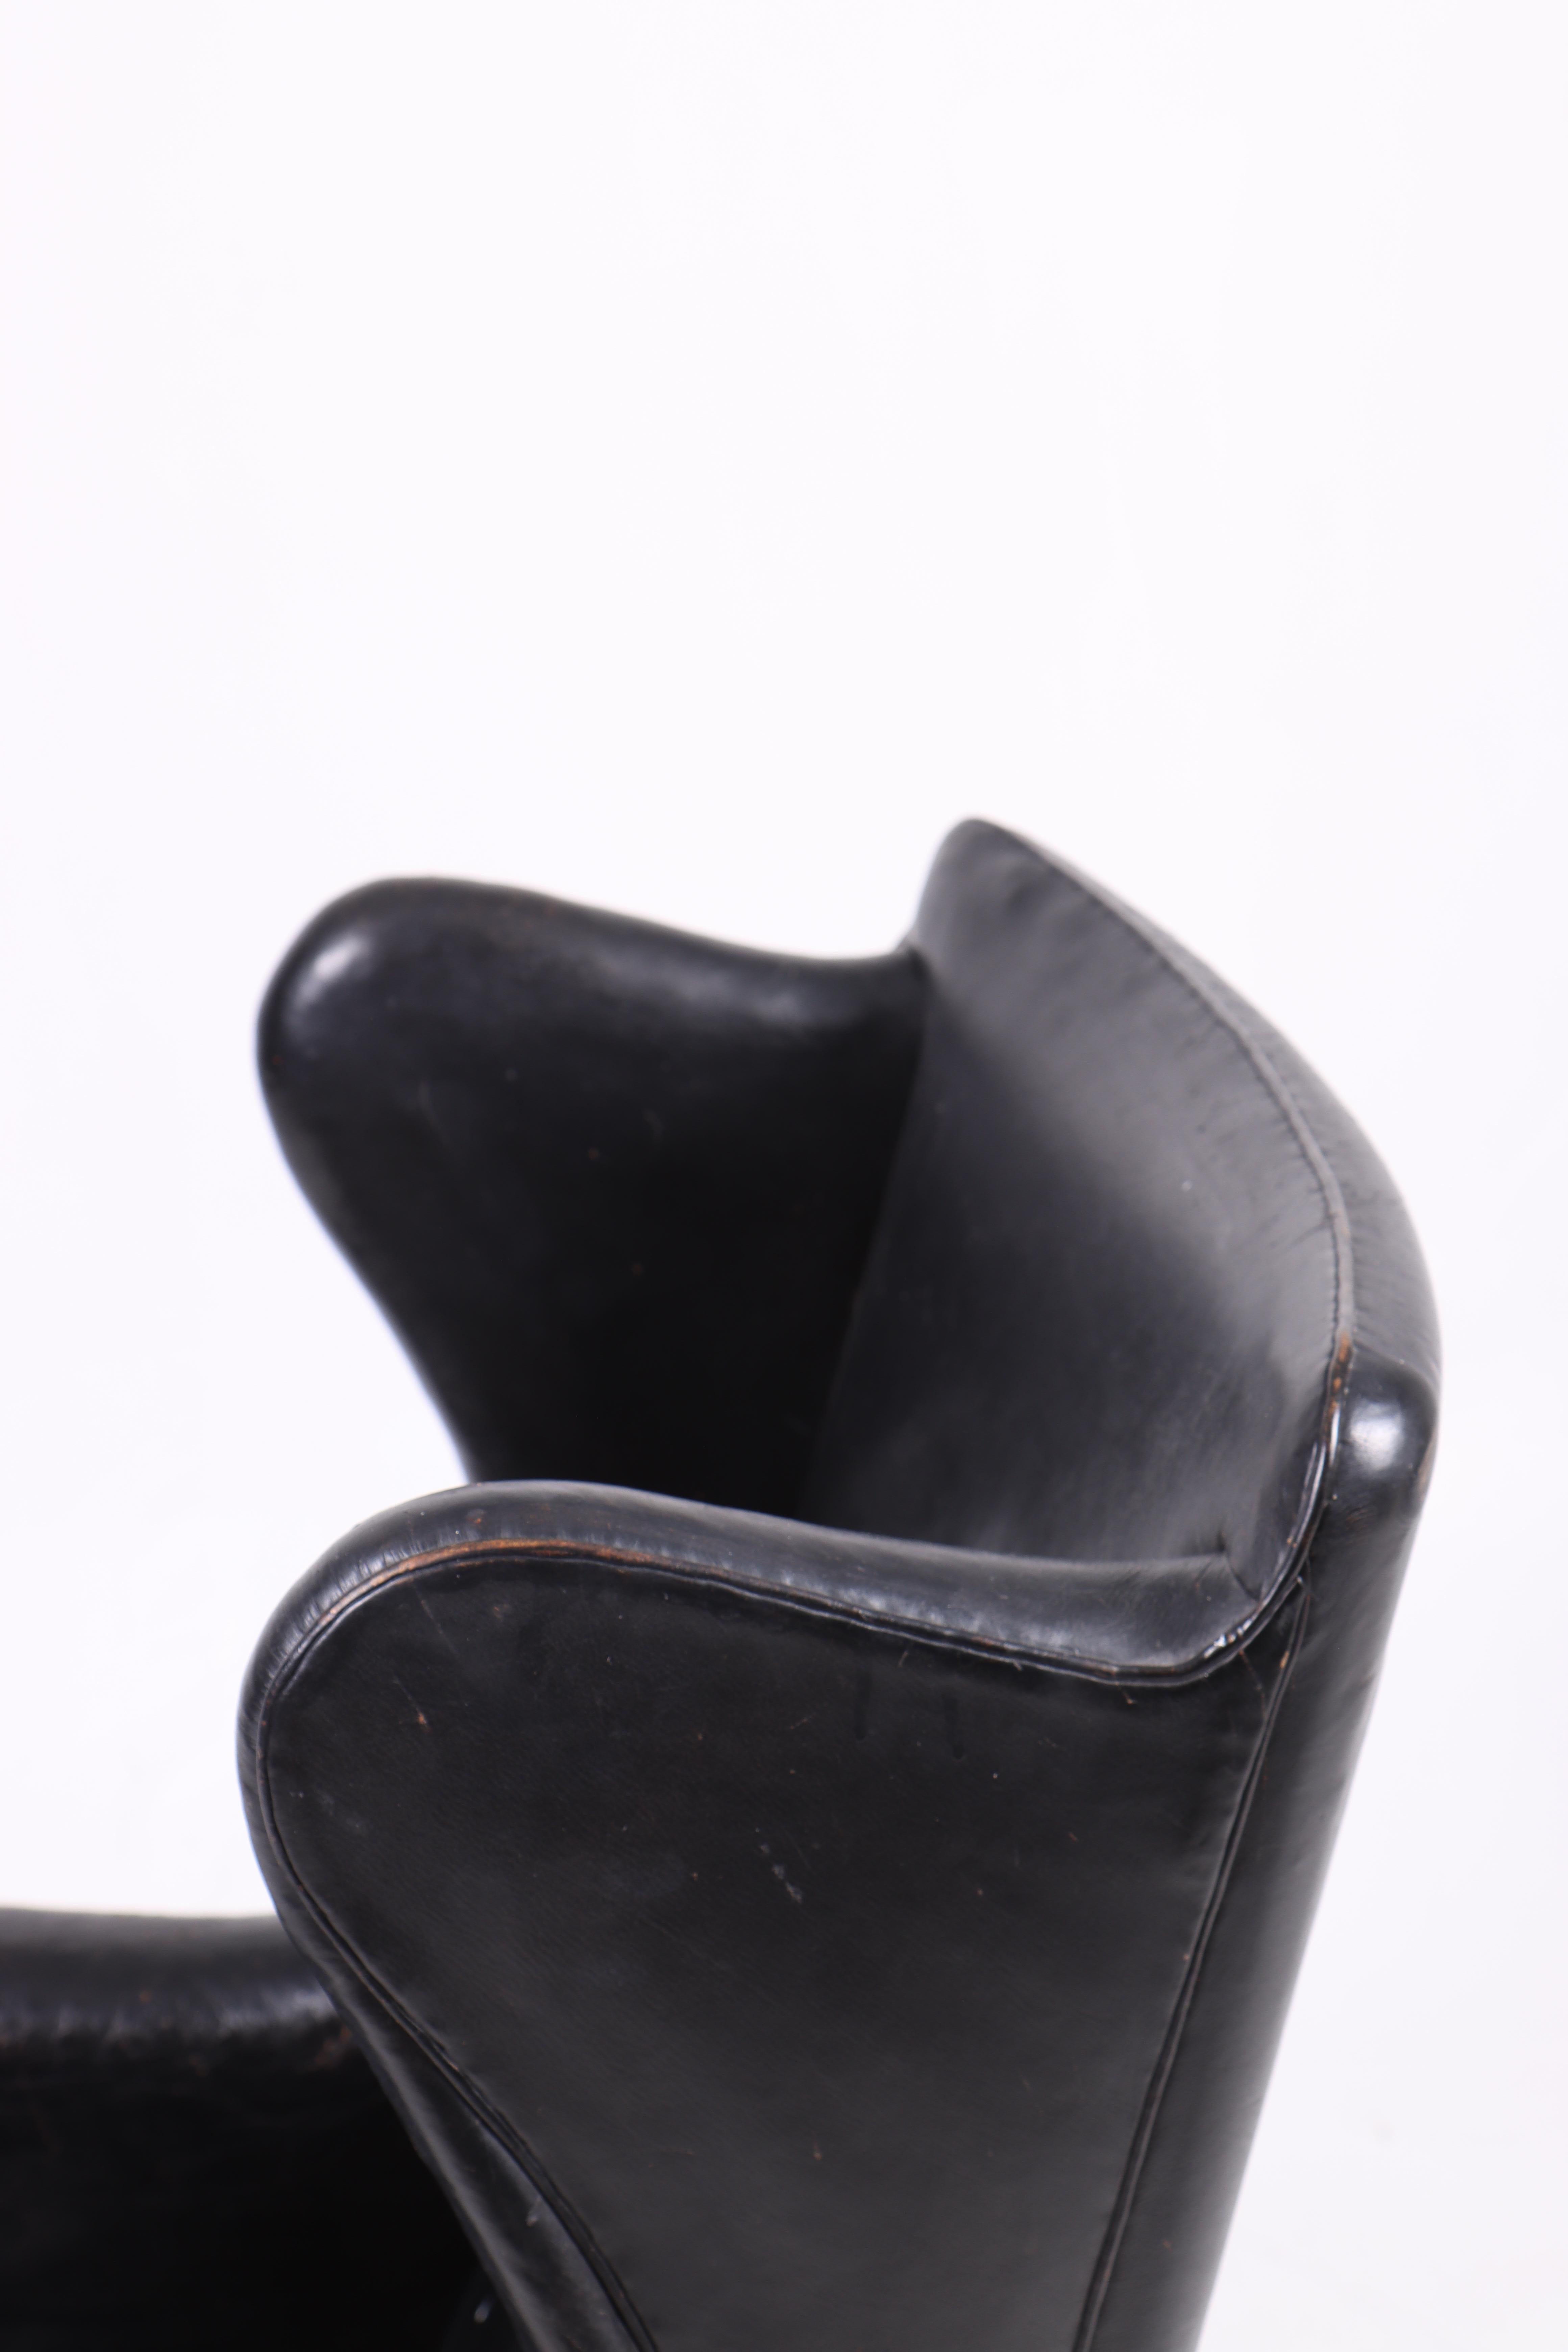 Mid-20th Century Pristine Wingback Chair in Patinated Leather by Kaare Klint, 1940s For Sale